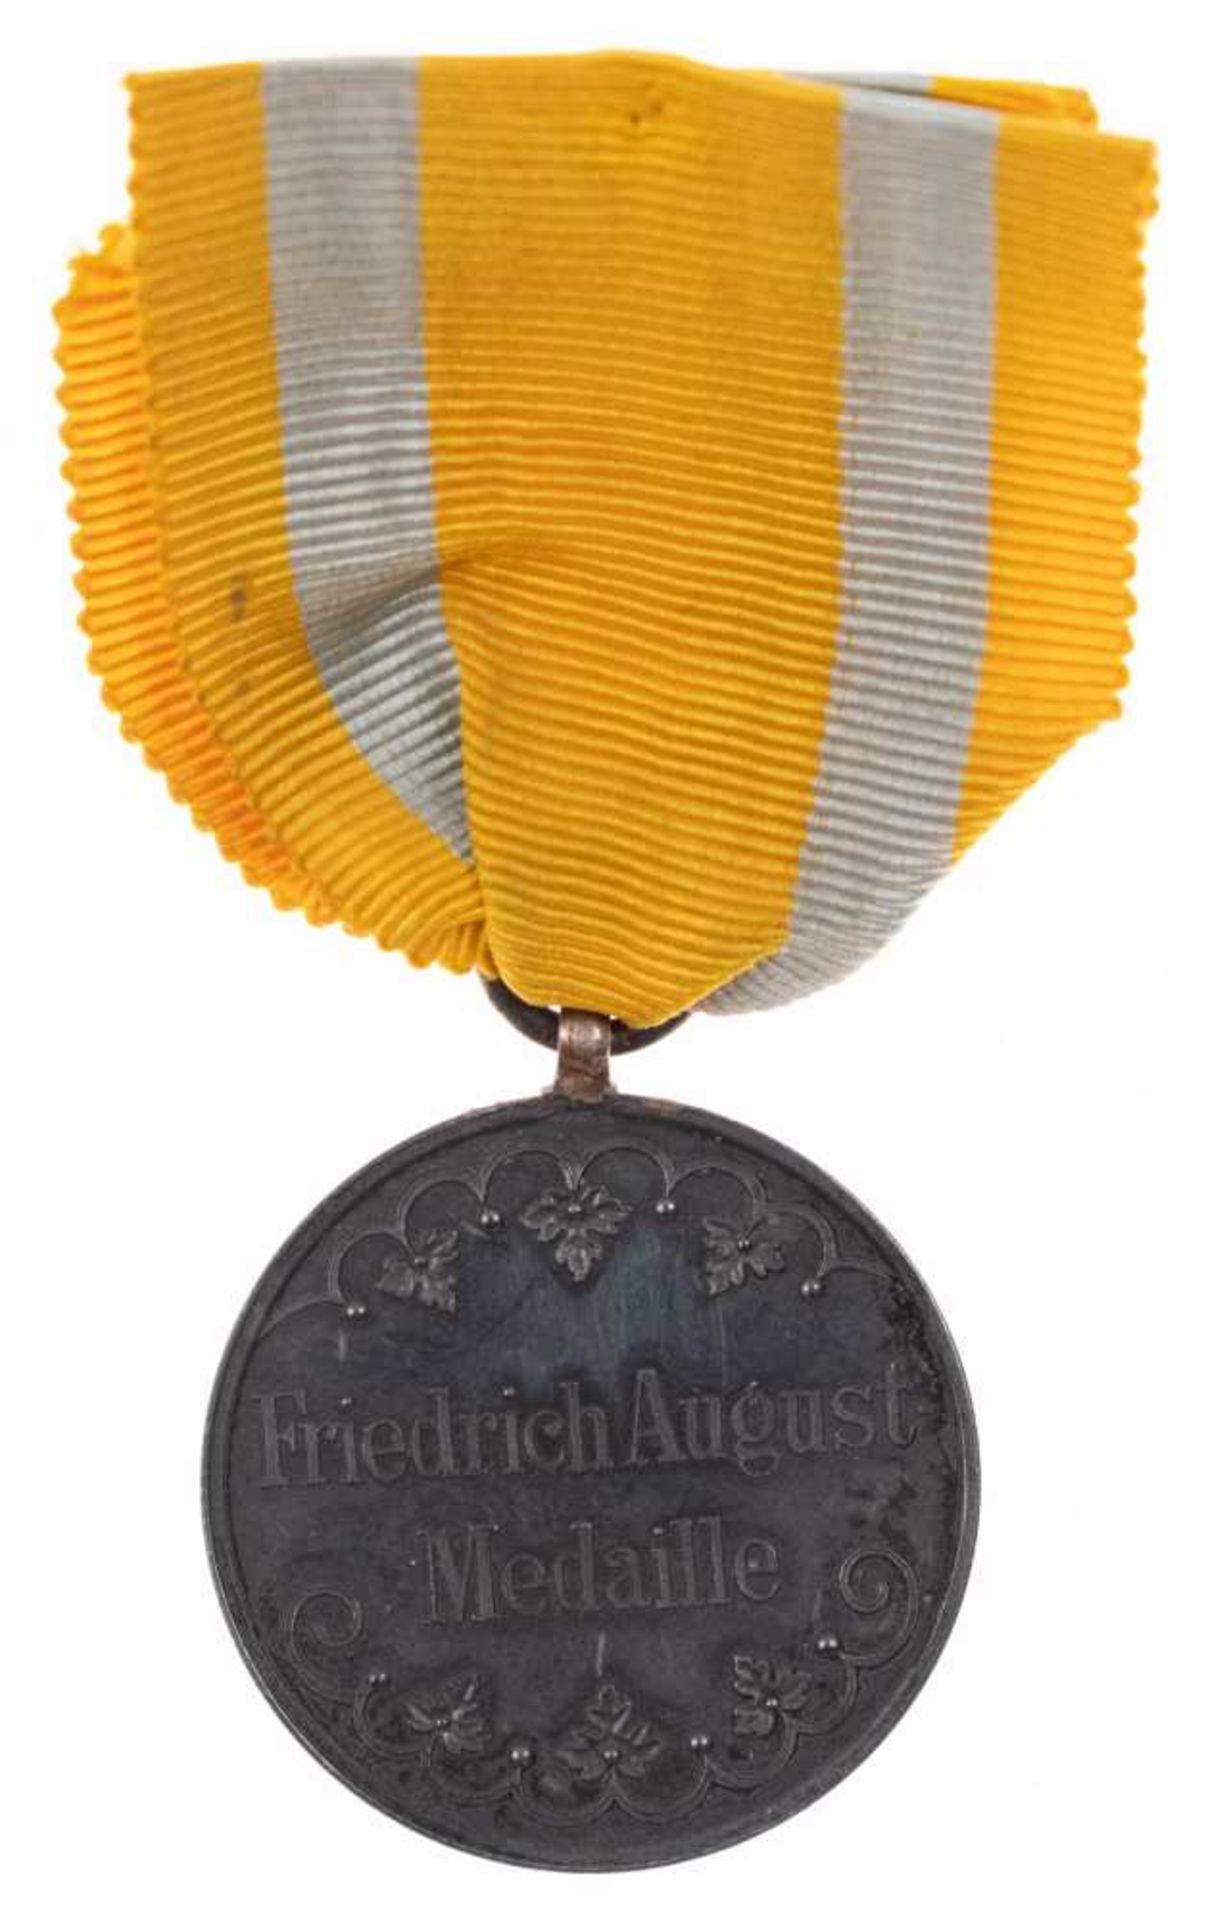 Saxony, Friedrich August medal, bronze silver-plated, at the war band (1905-1918), OEK 2283, tarnish - Image 2 of 2